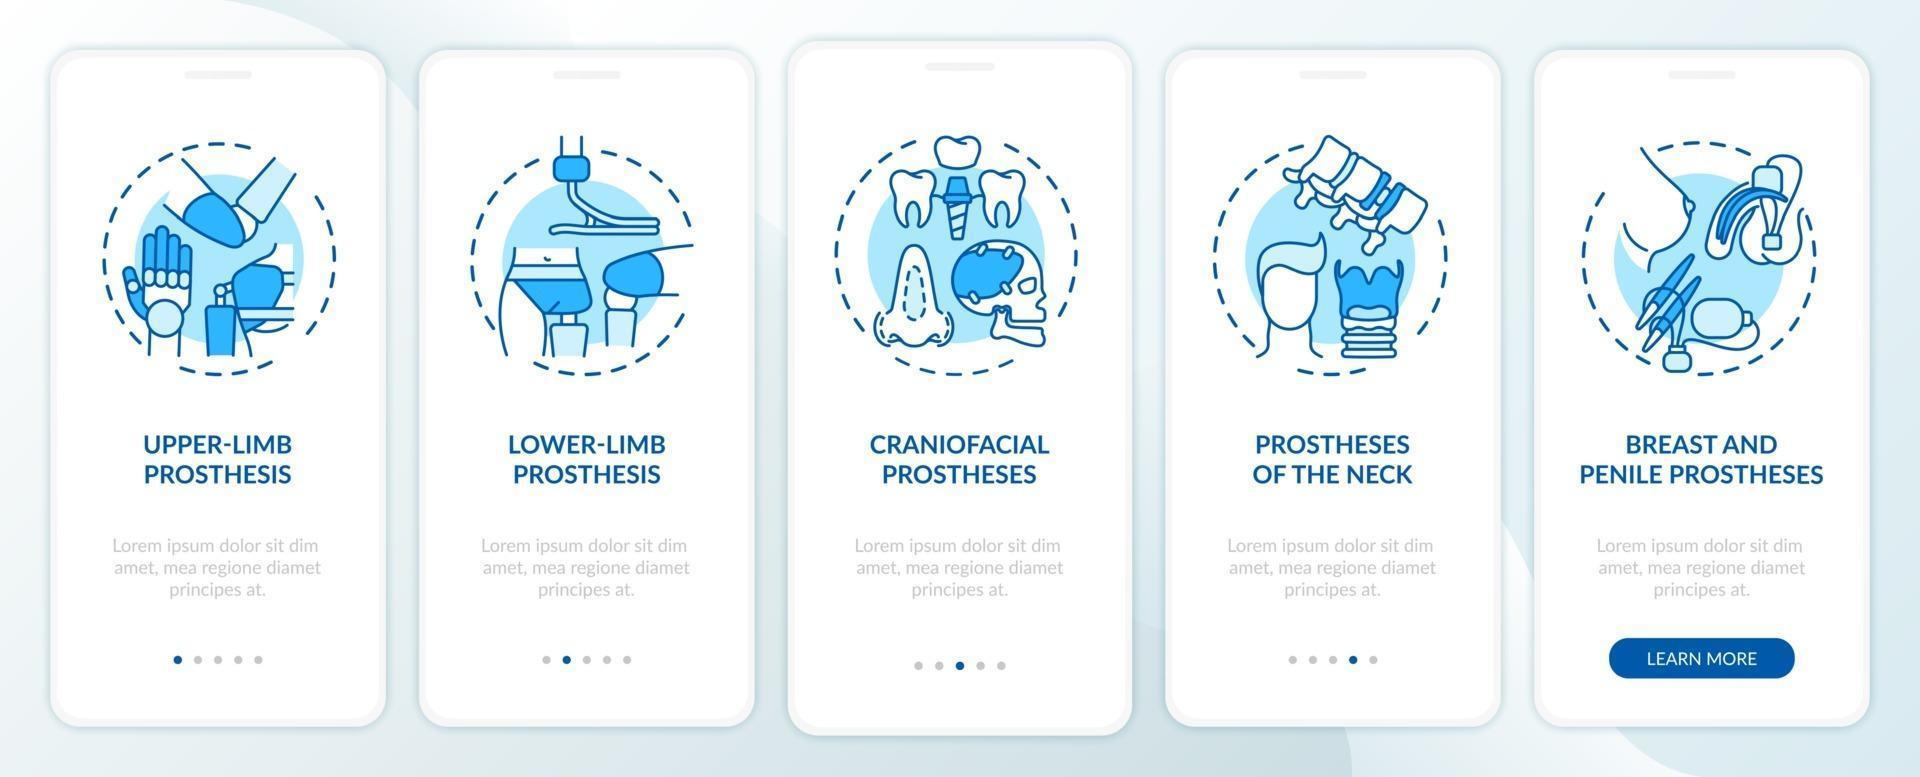 Implants types onboarding mobile app page screen with concepts vector